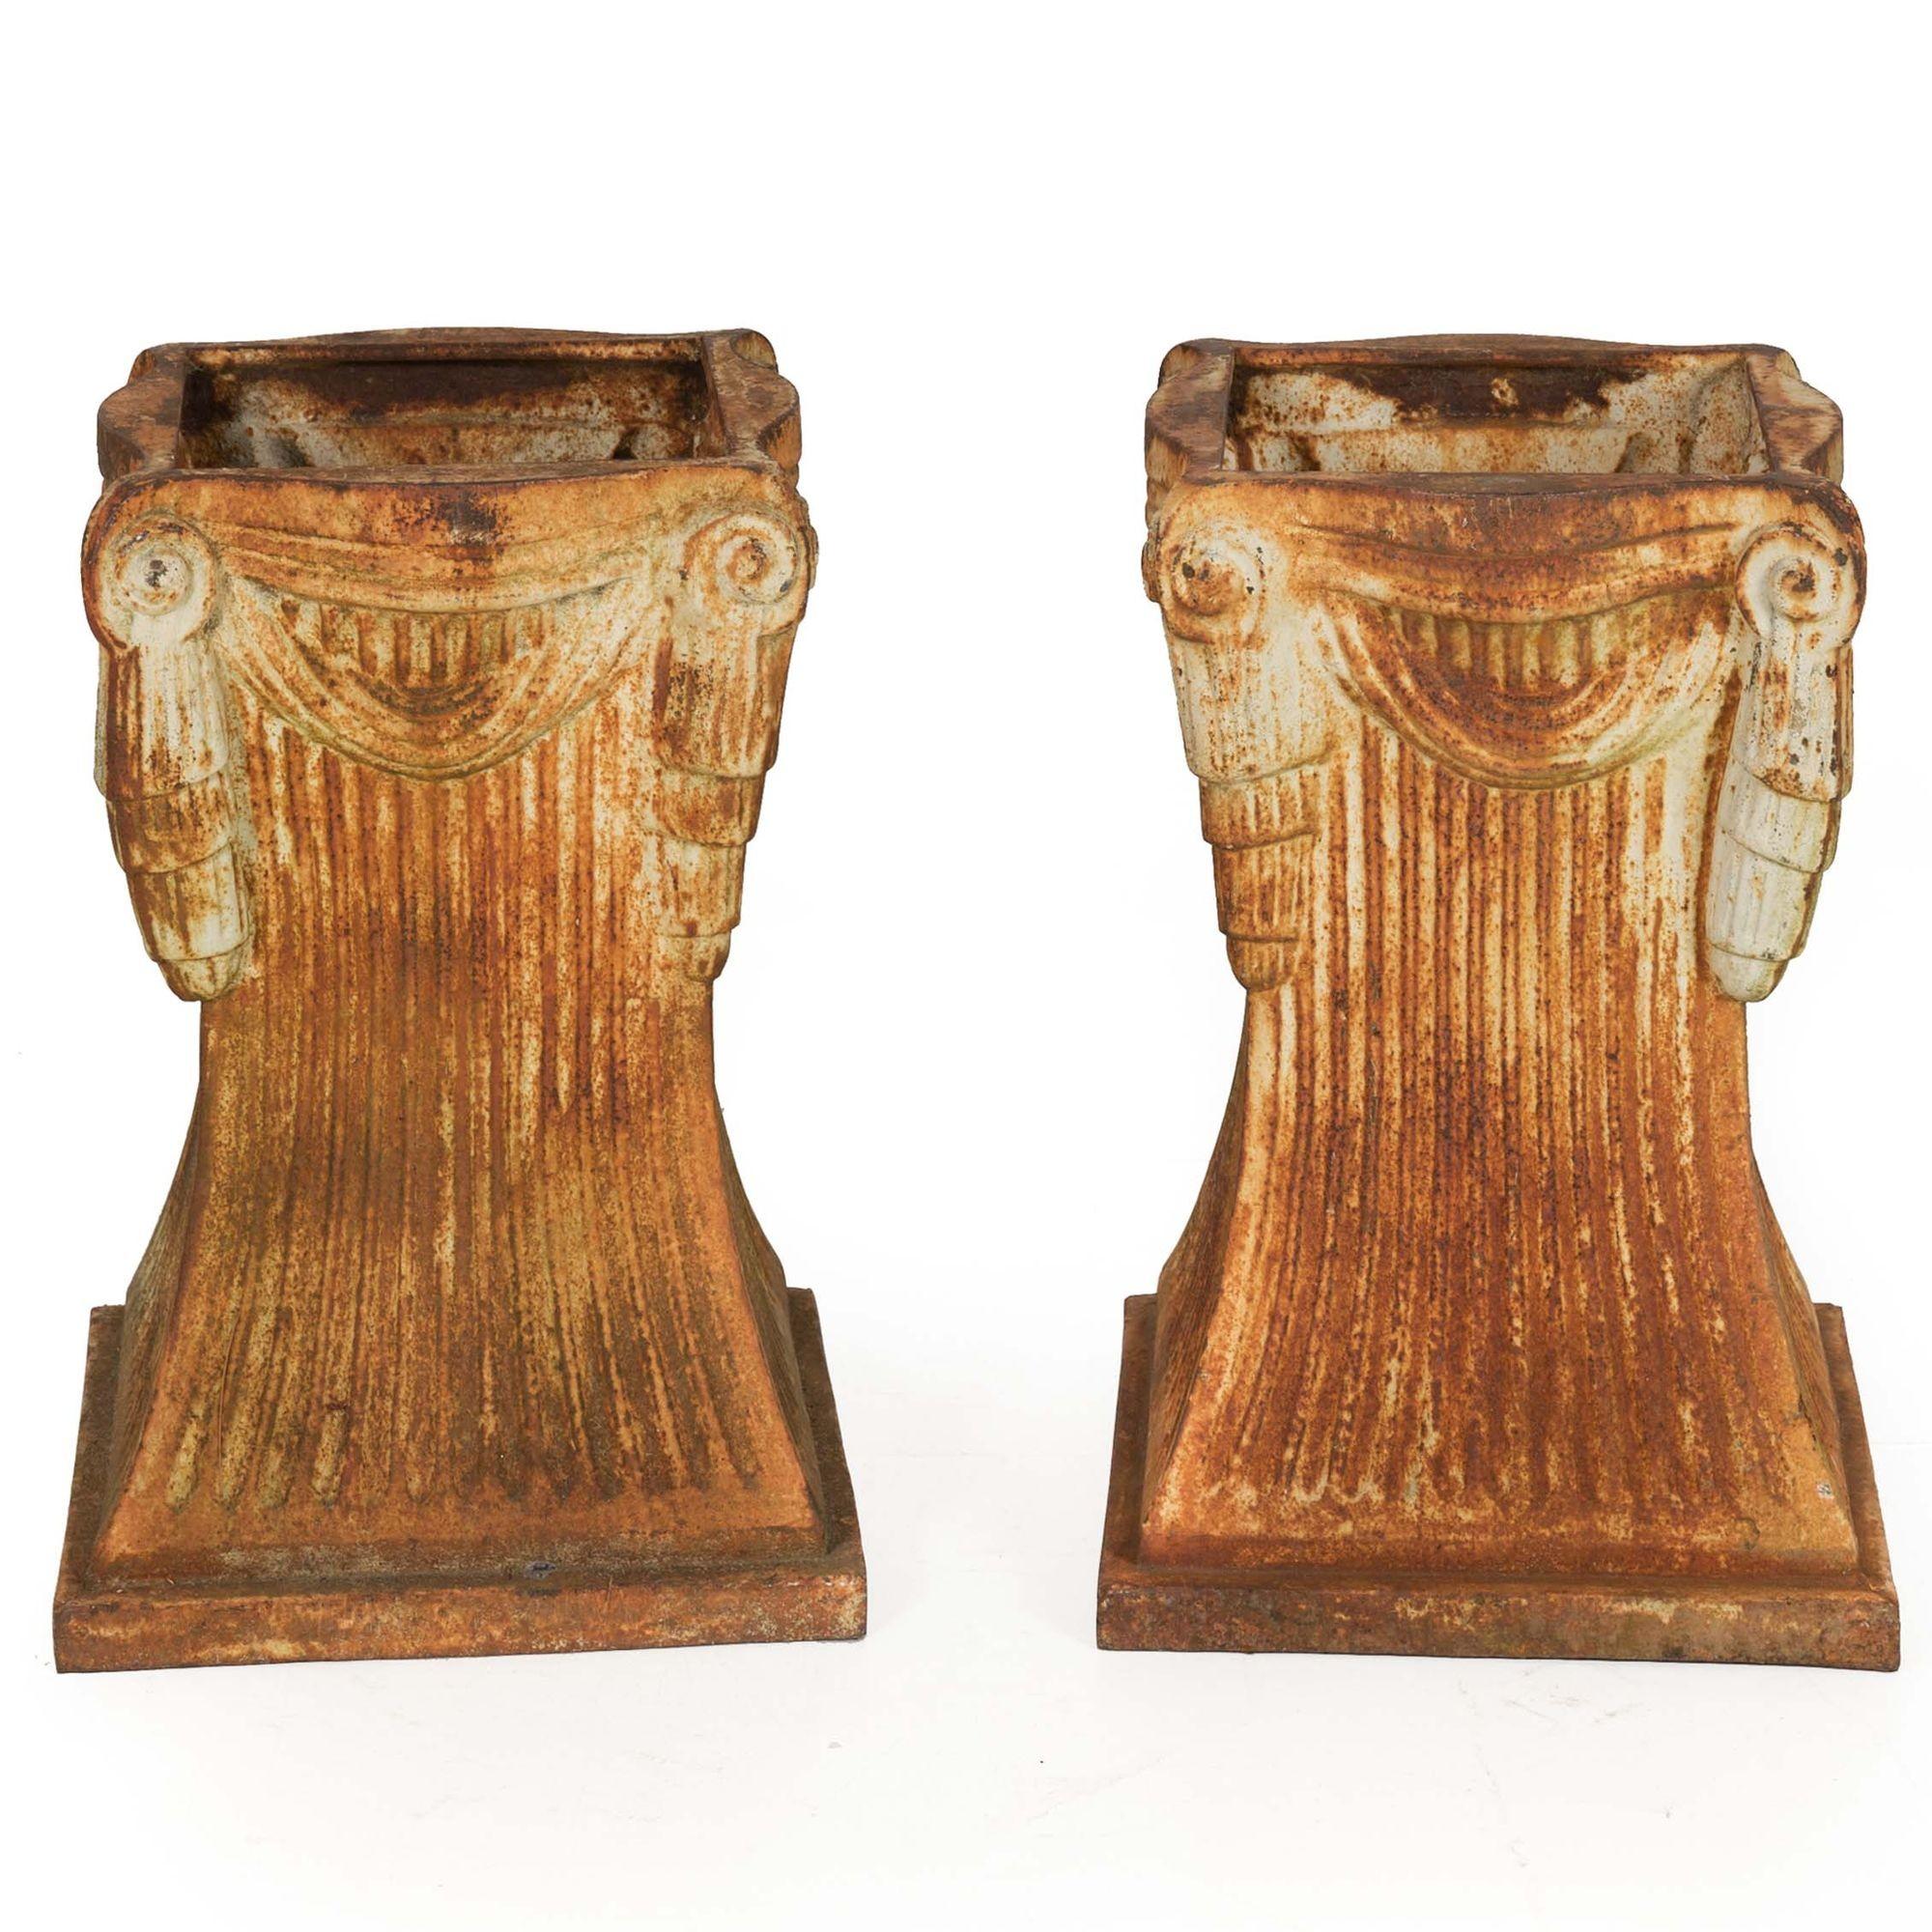 PAIR OF ART DECO CAST-IRON OUTDOOR GARDEN PEDESTALS FOR URNS OR STATUARY
Circa second quarter of 20th century  unmarked
Item # 209LEM16K-2

A most unusual and visually striking pair of cast-iron outdoor garden pedestals for raising planters, urns or